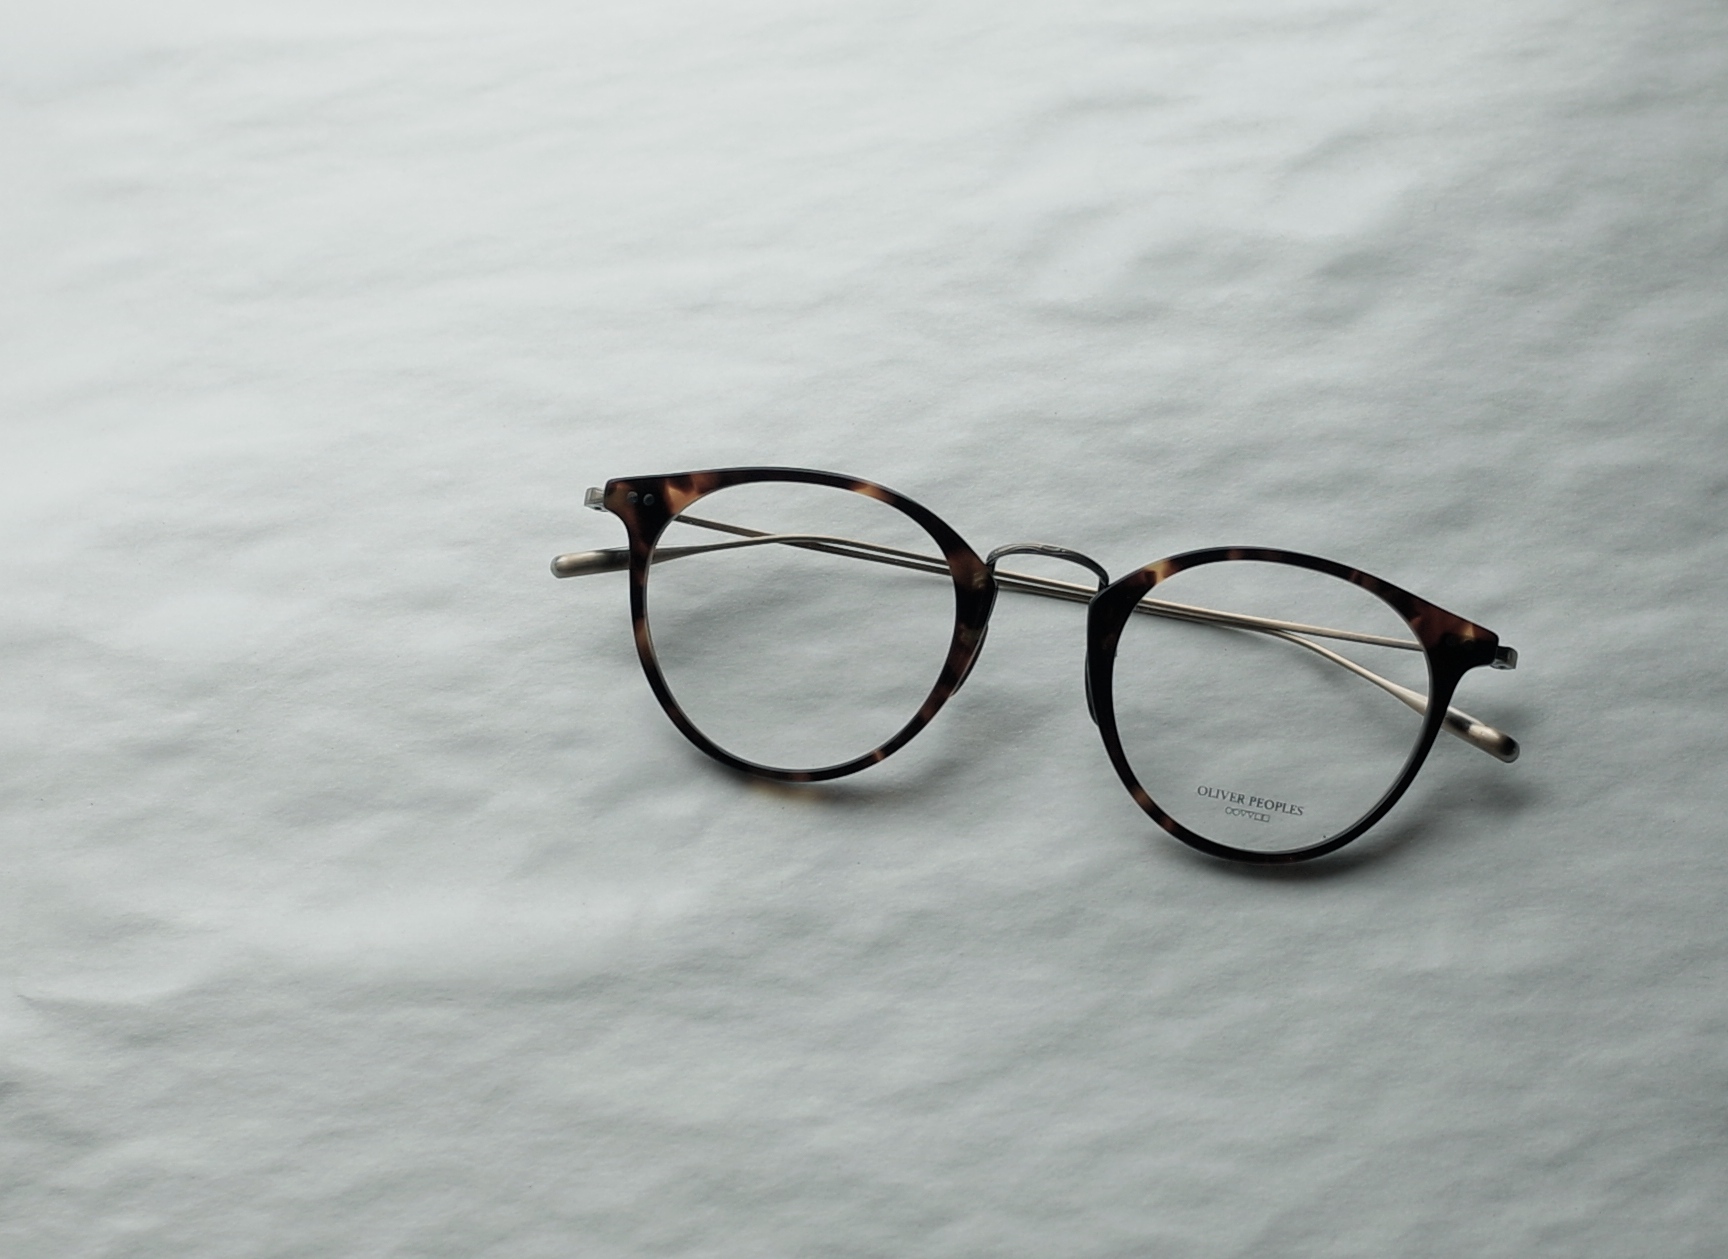 OLIVER PEOPLES / DECKENS SOLD | ビジュ寺口 ／ 時計・アンティーク 